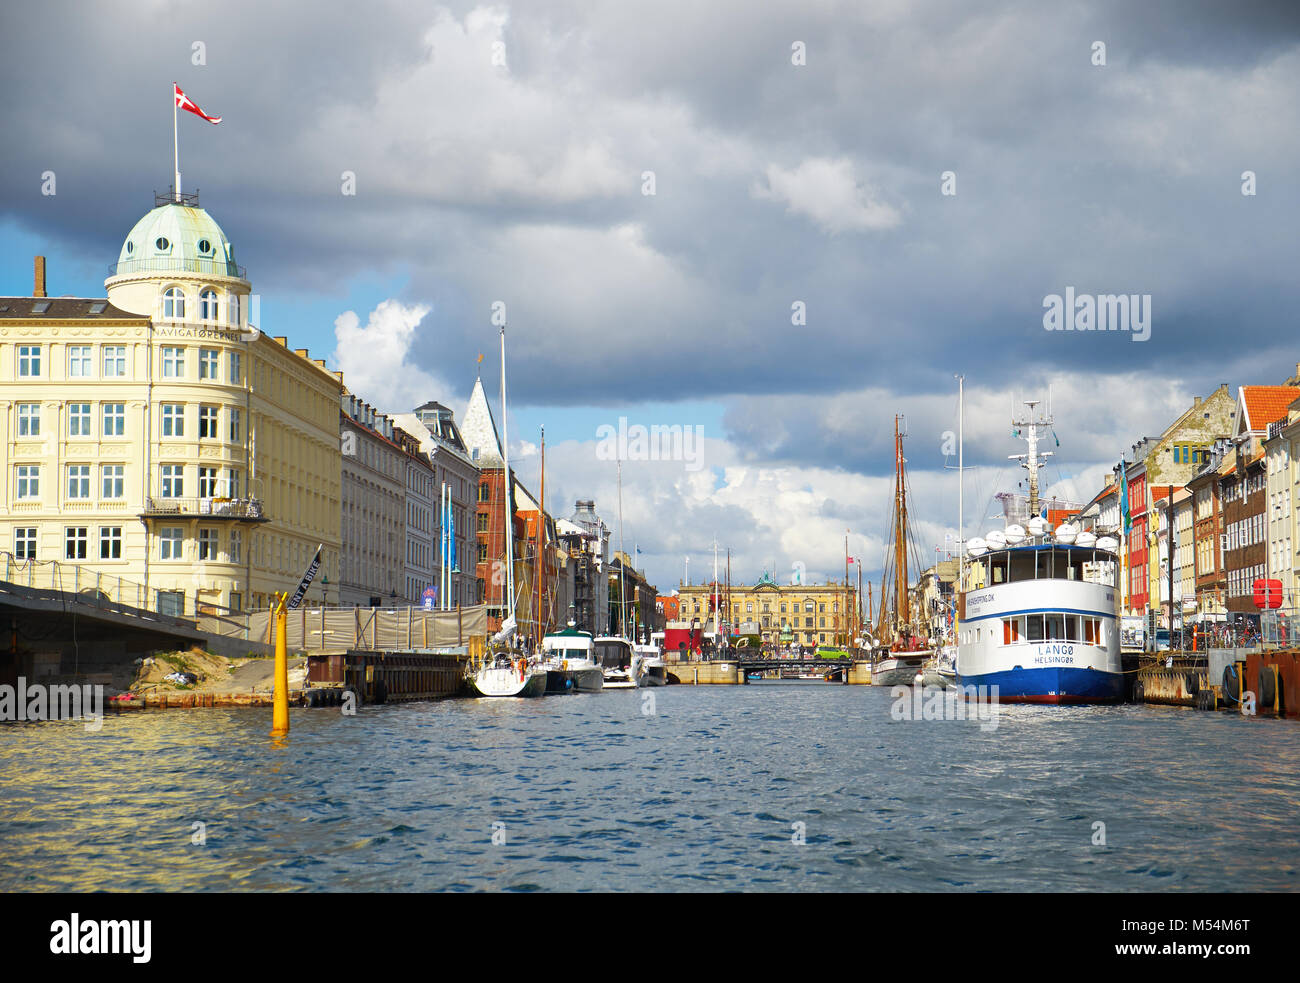 The mouth of the Nyhavn canal in Copenhagen. Stock Photo